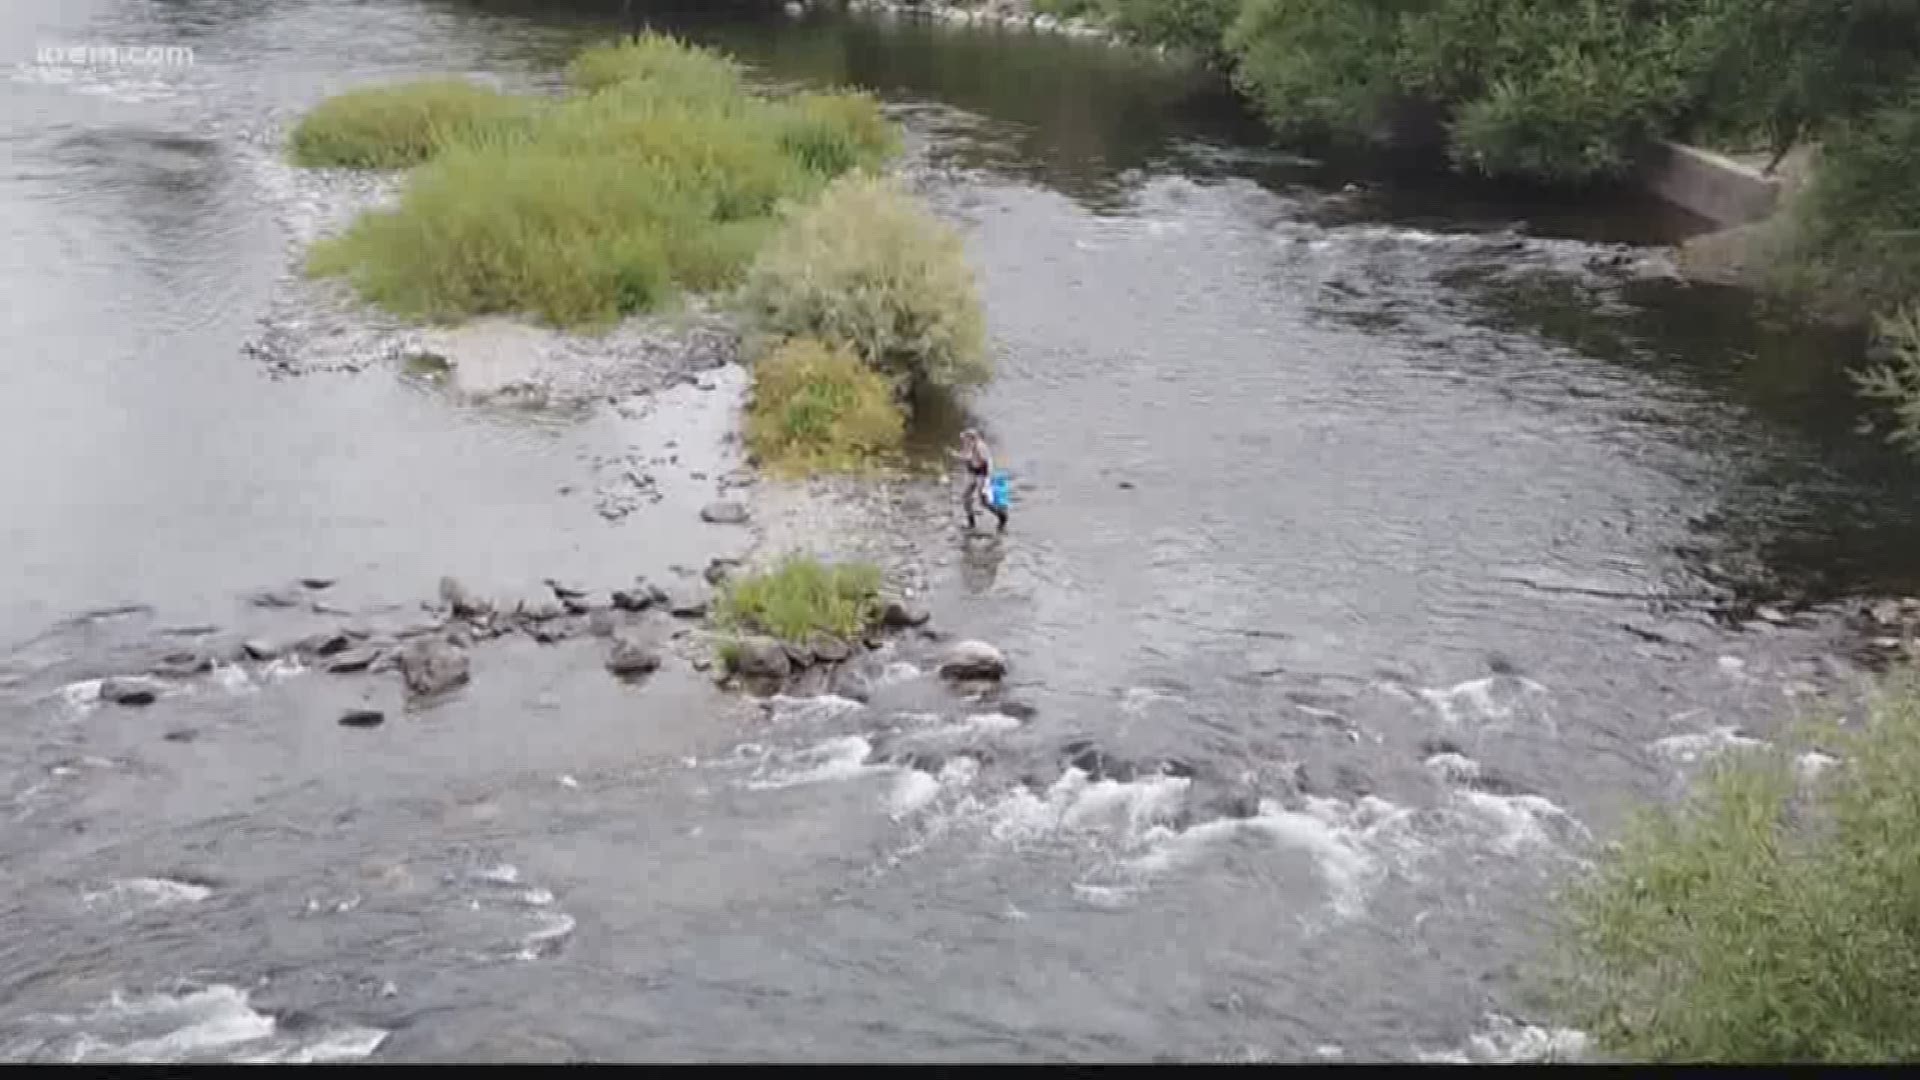 Spokane River cleanup brings out a large crowd to conserve the environment